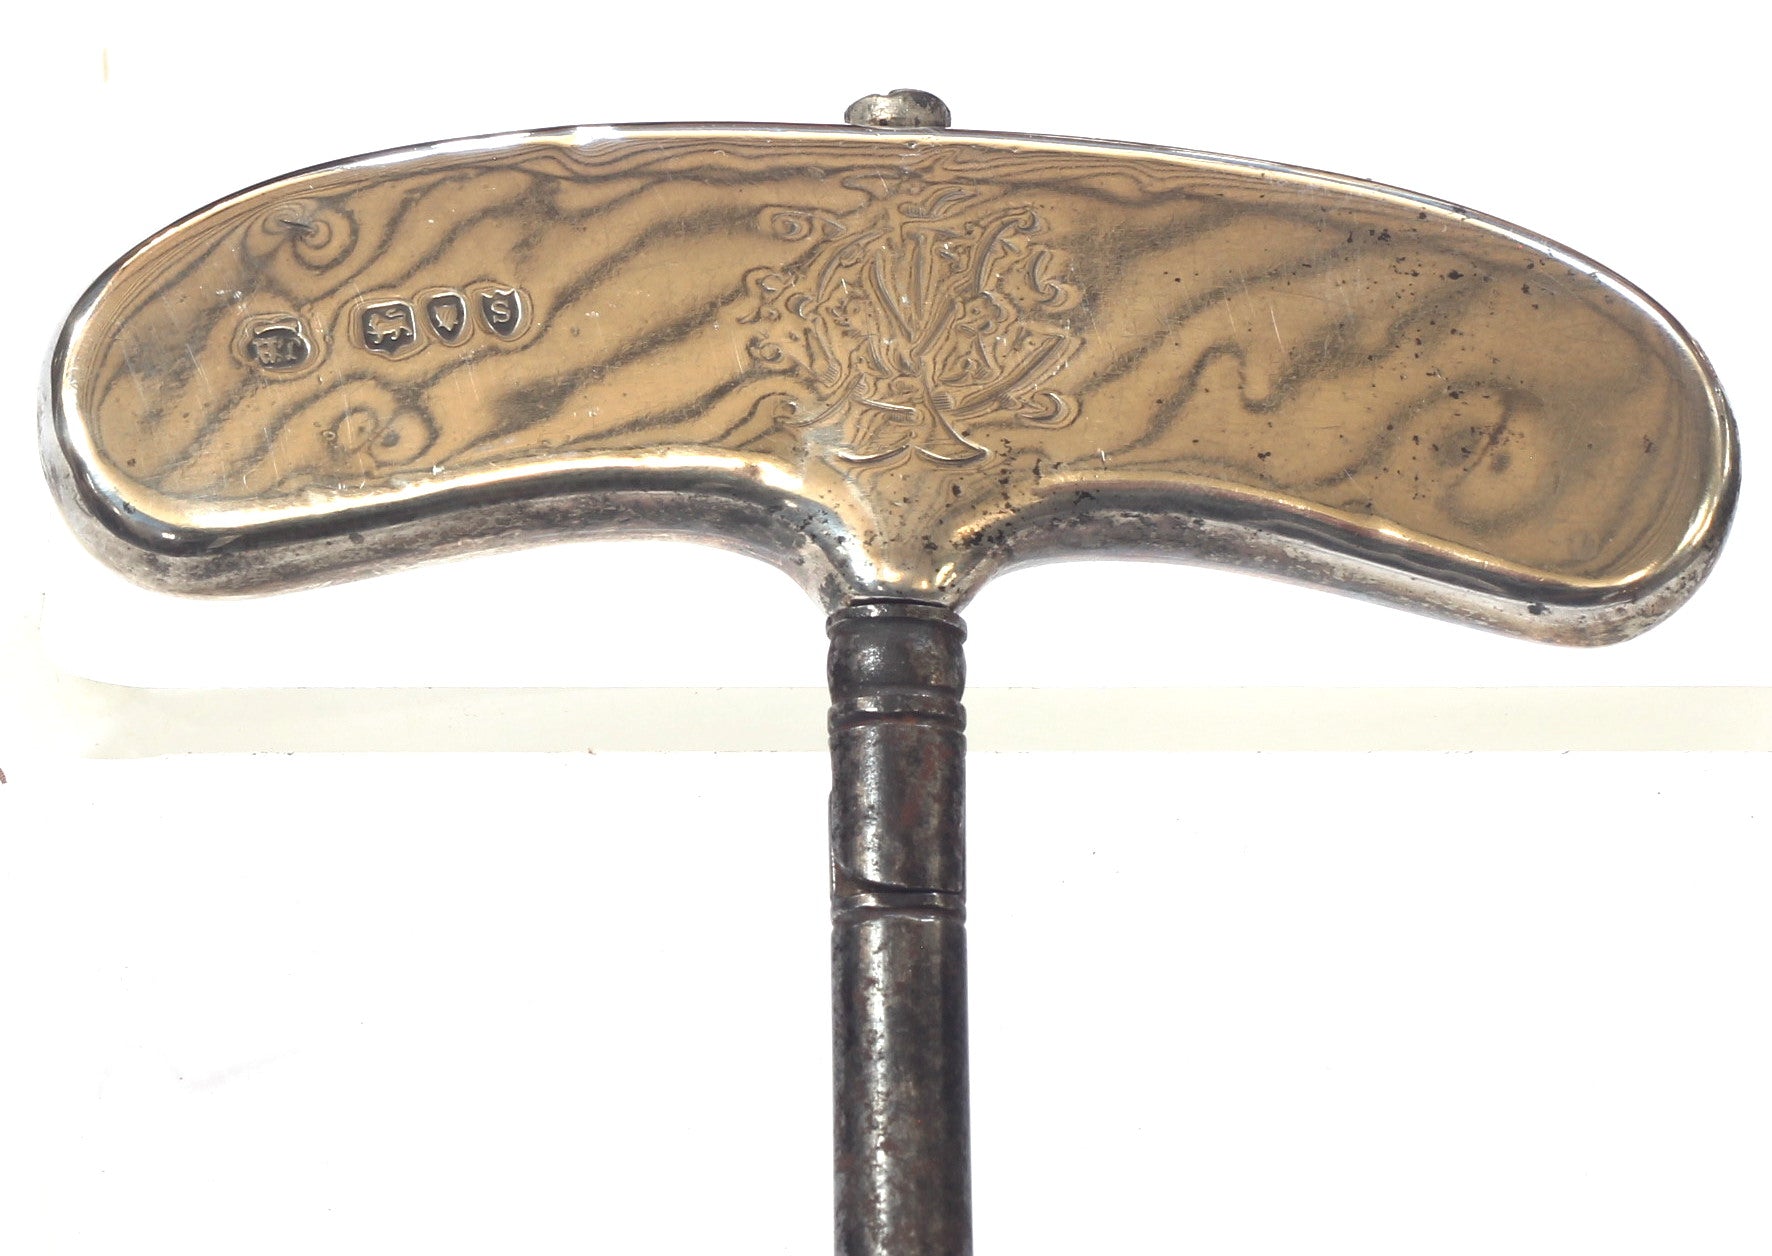 1893 Silver Handled Boot Pulls with Baron's Coronet